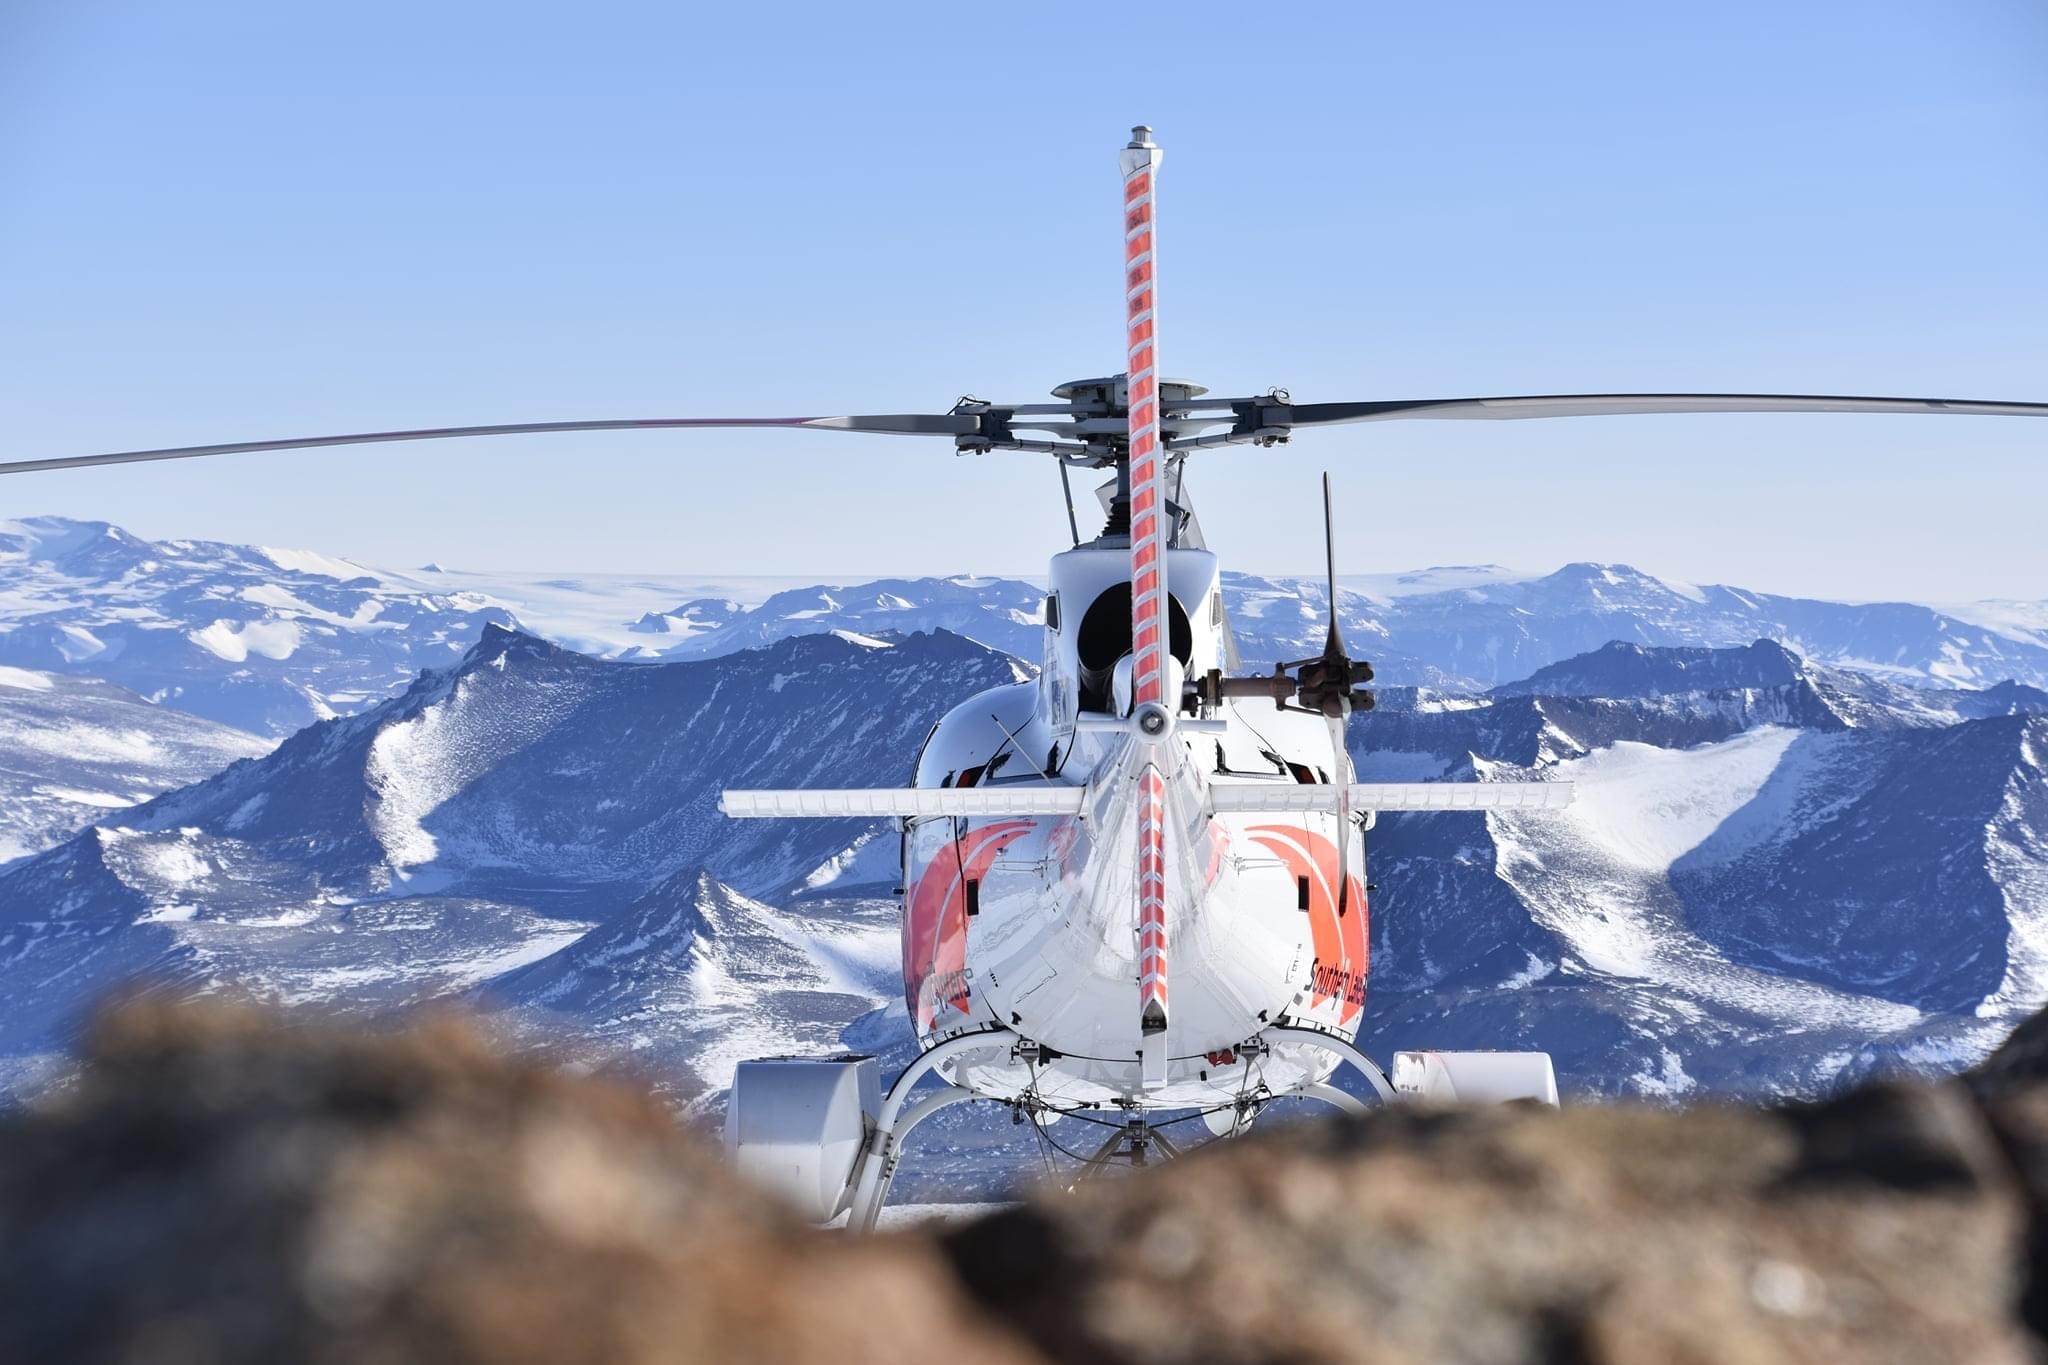 Our Helicopters supporting critical studies in Antarctica